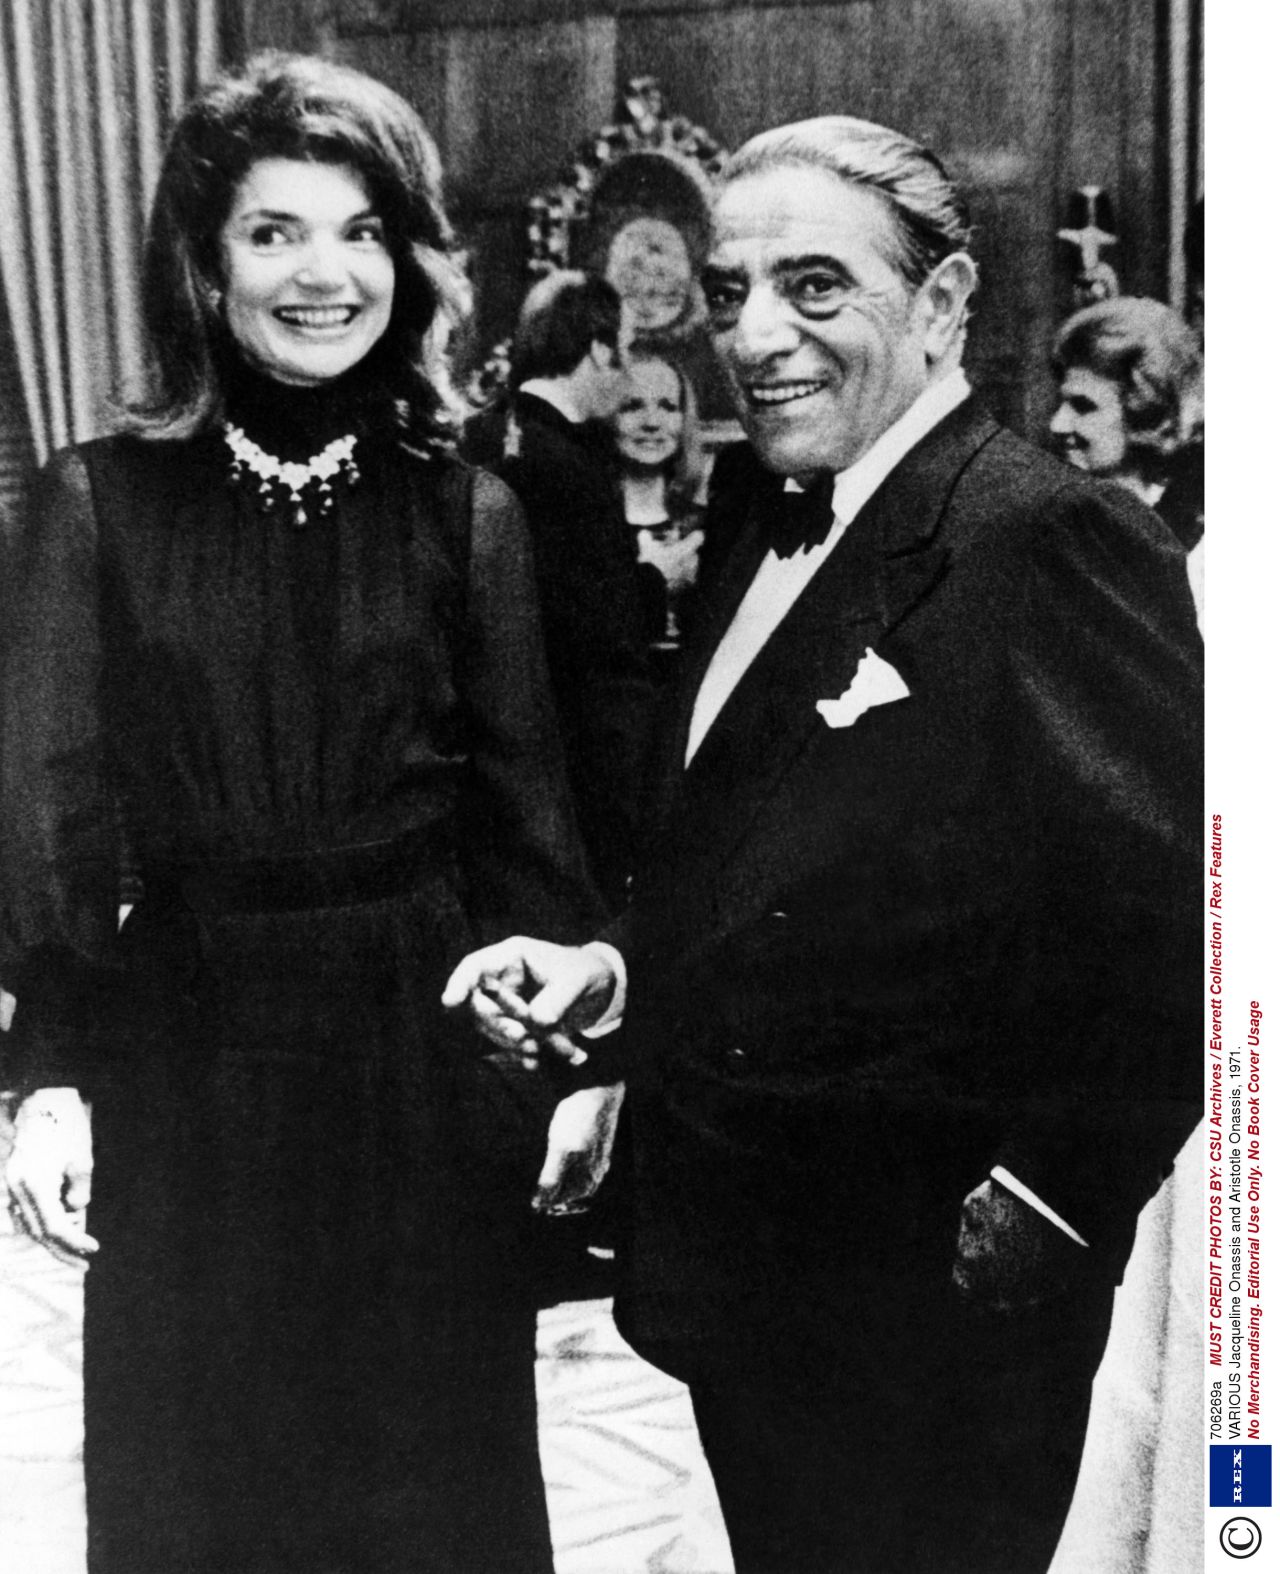 Emeralds continued to be popular with the jet-set well into the 20th century. Here, one of the greatest fashion icons of her time Jacqueline Kennedy  Onassis is wearing her Van Cleef & Arpels emerald necklace, in a photo with her husband  Aristotle Onassis in 1971.